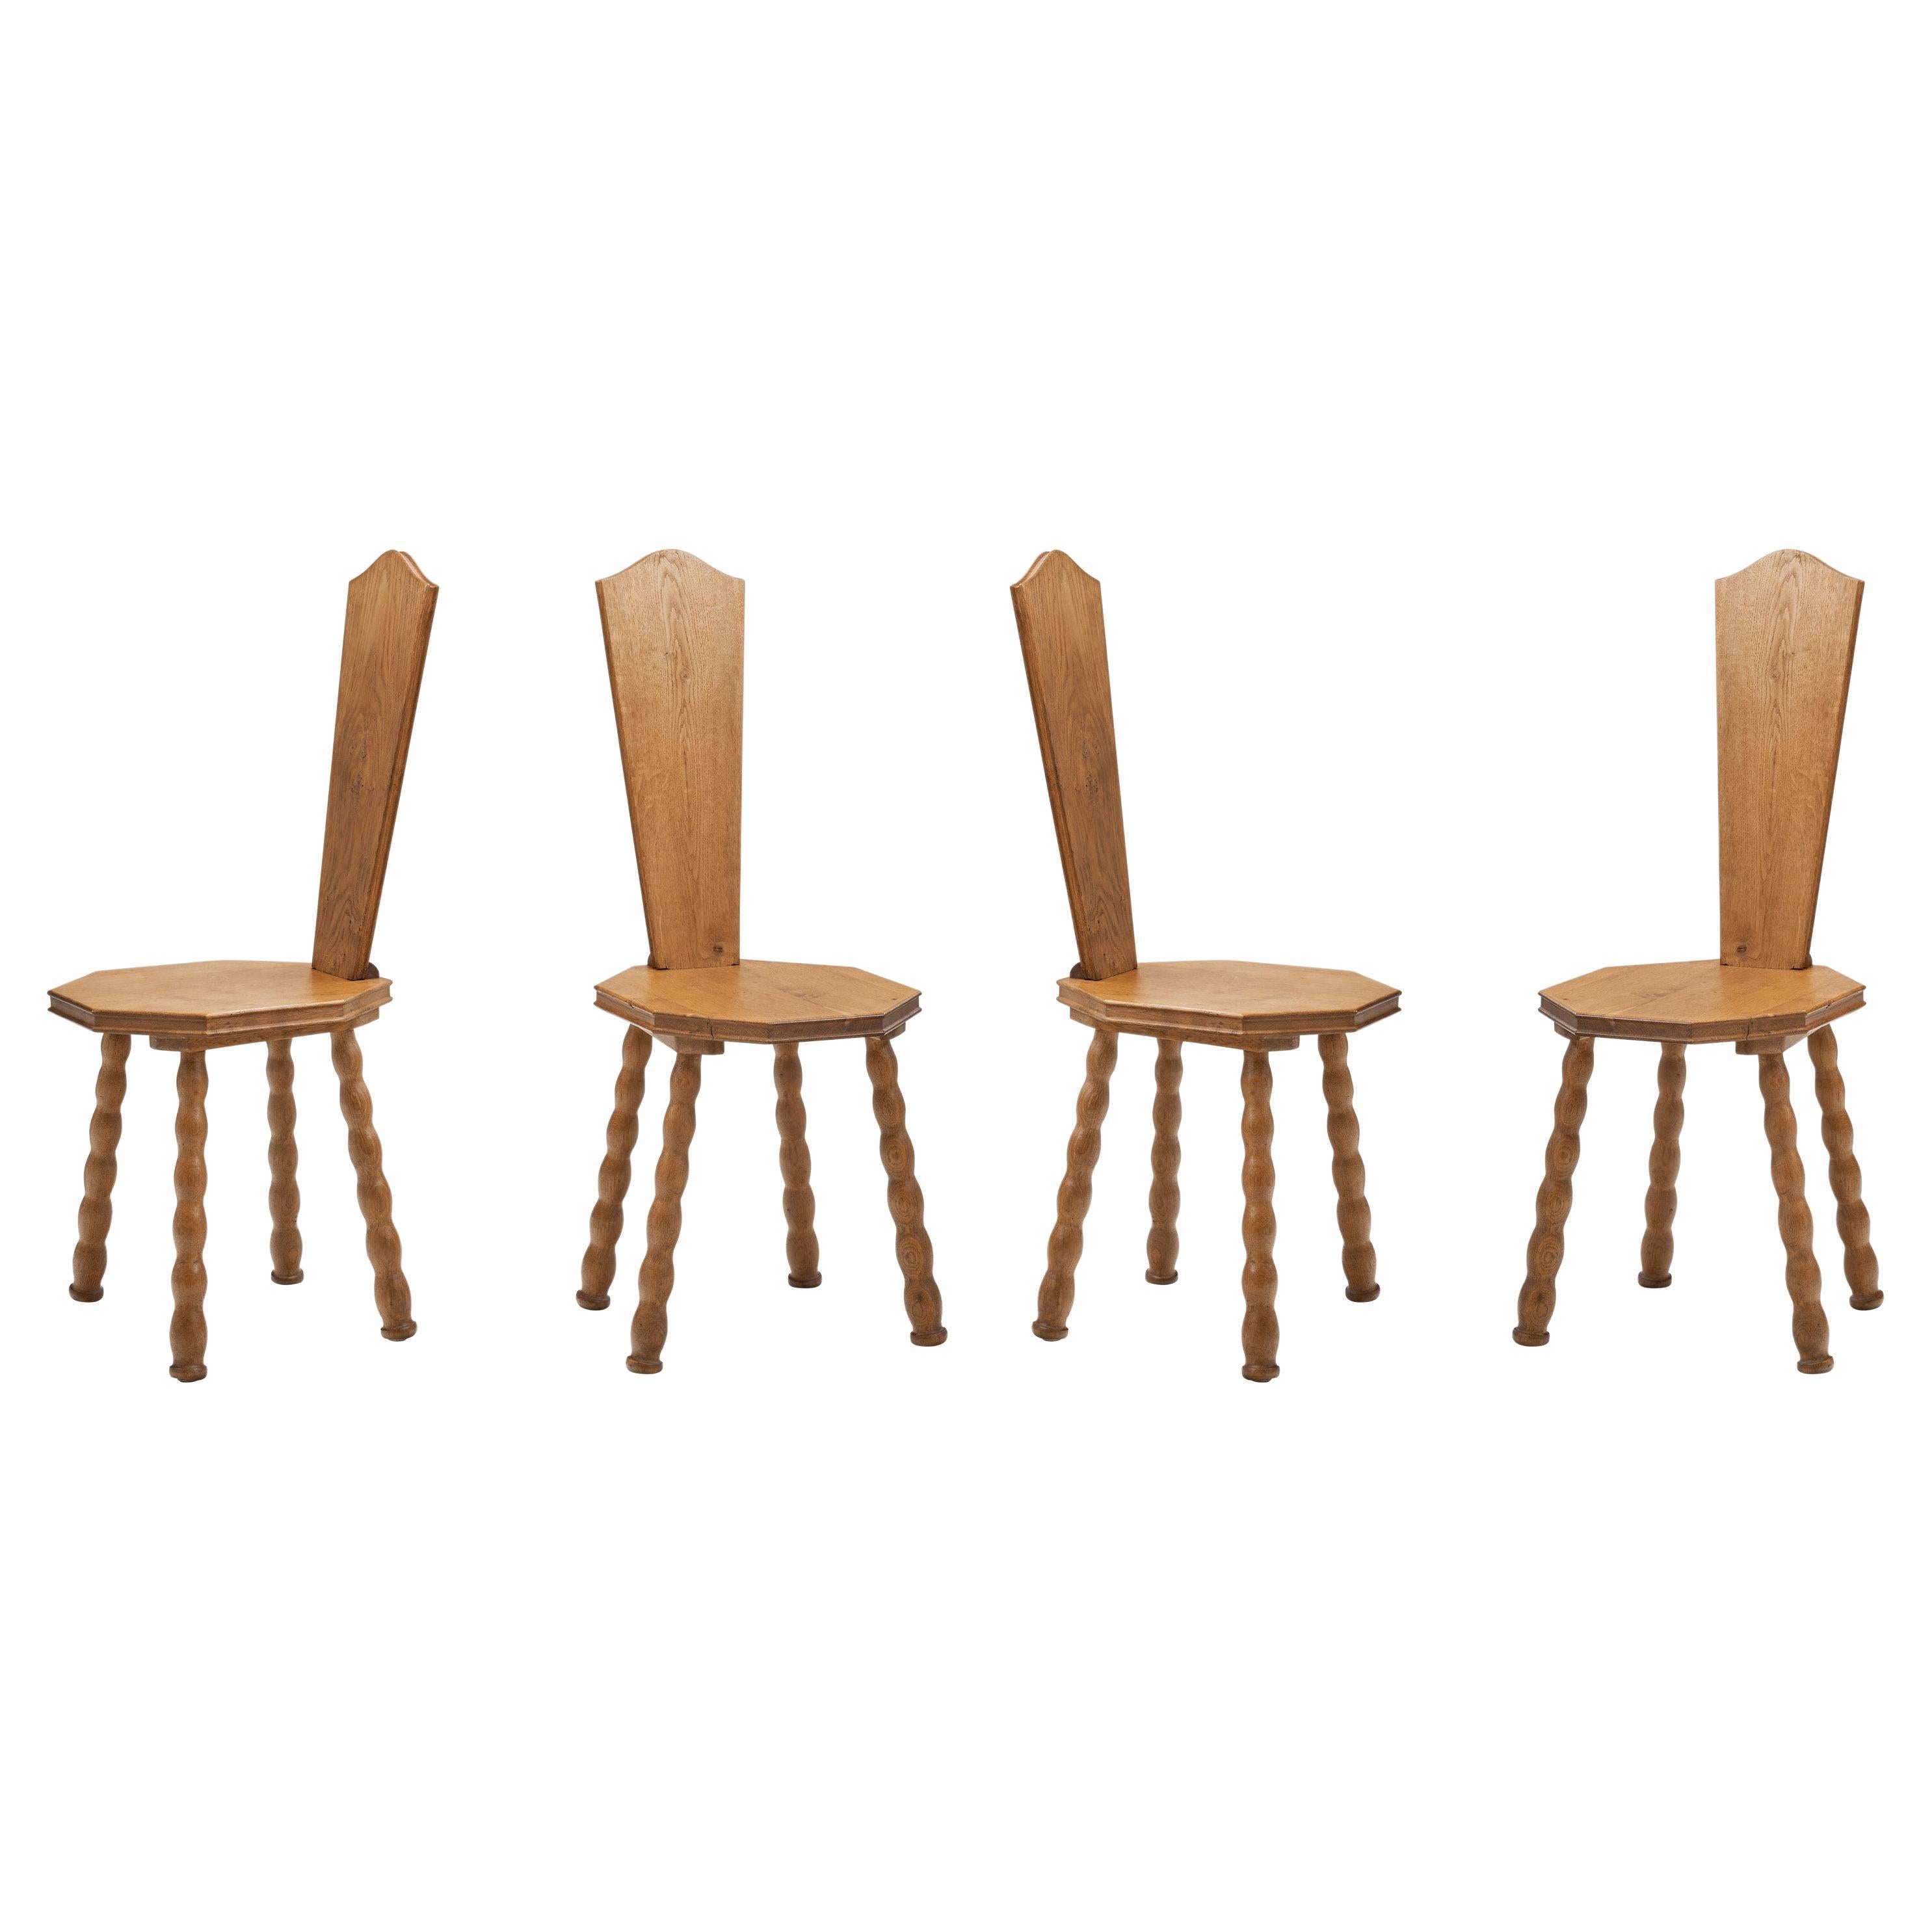 Set of 4 Sculptural Patinated Oak Spinning Chairs, Europe ca early 20th century